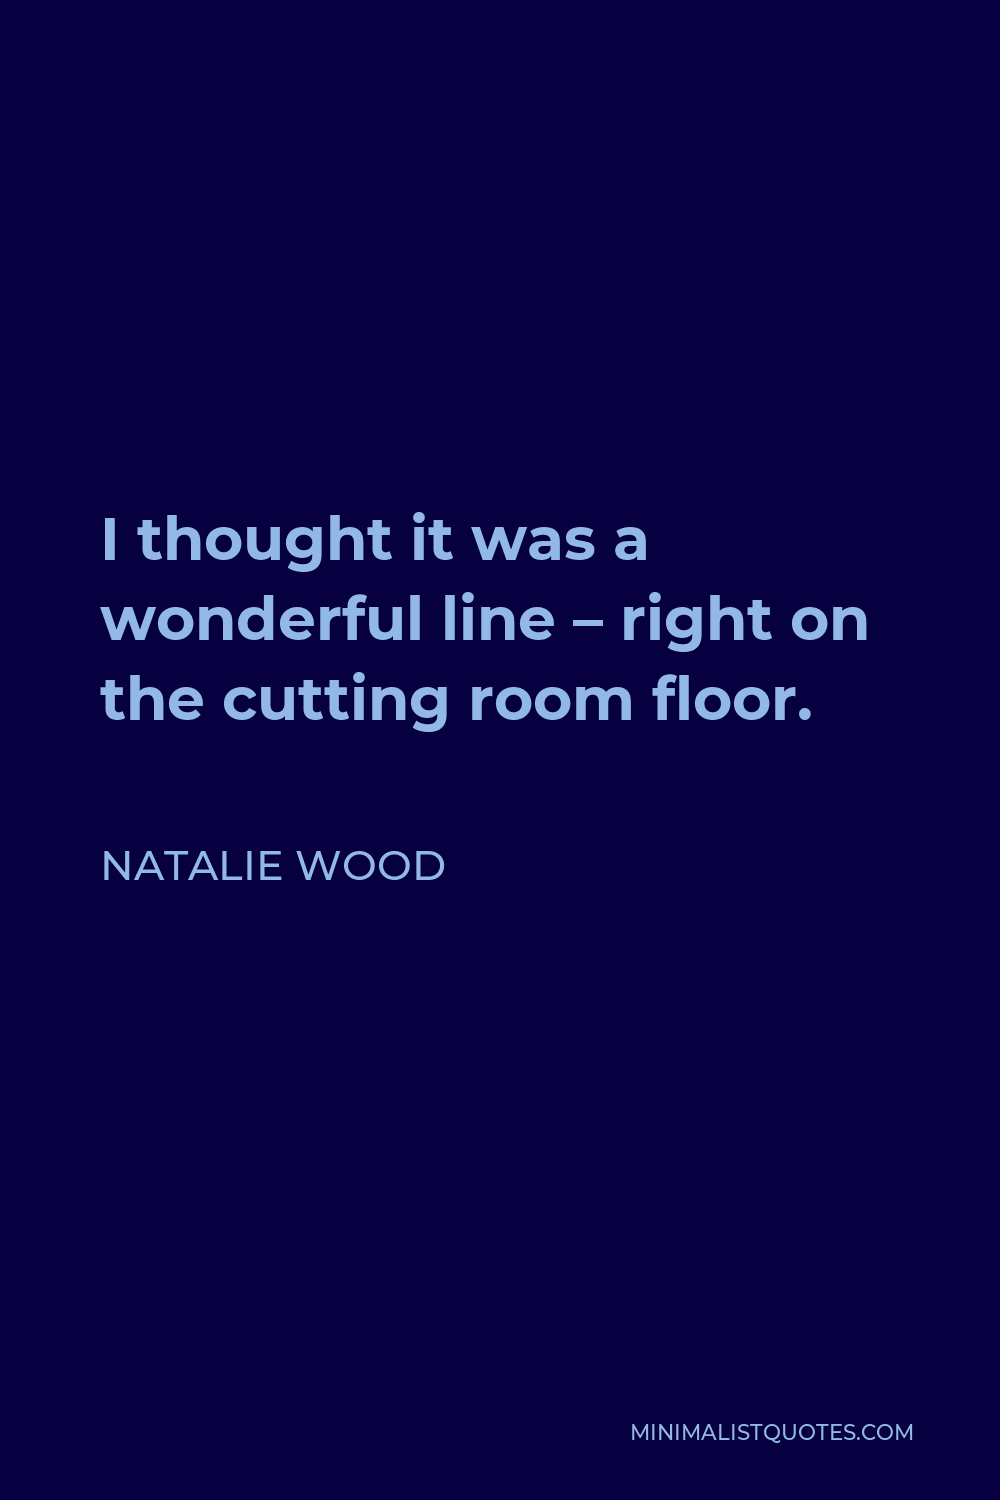 Natalie Wood Quote - I thought it was a wonderful line – right on the cutting room floor.